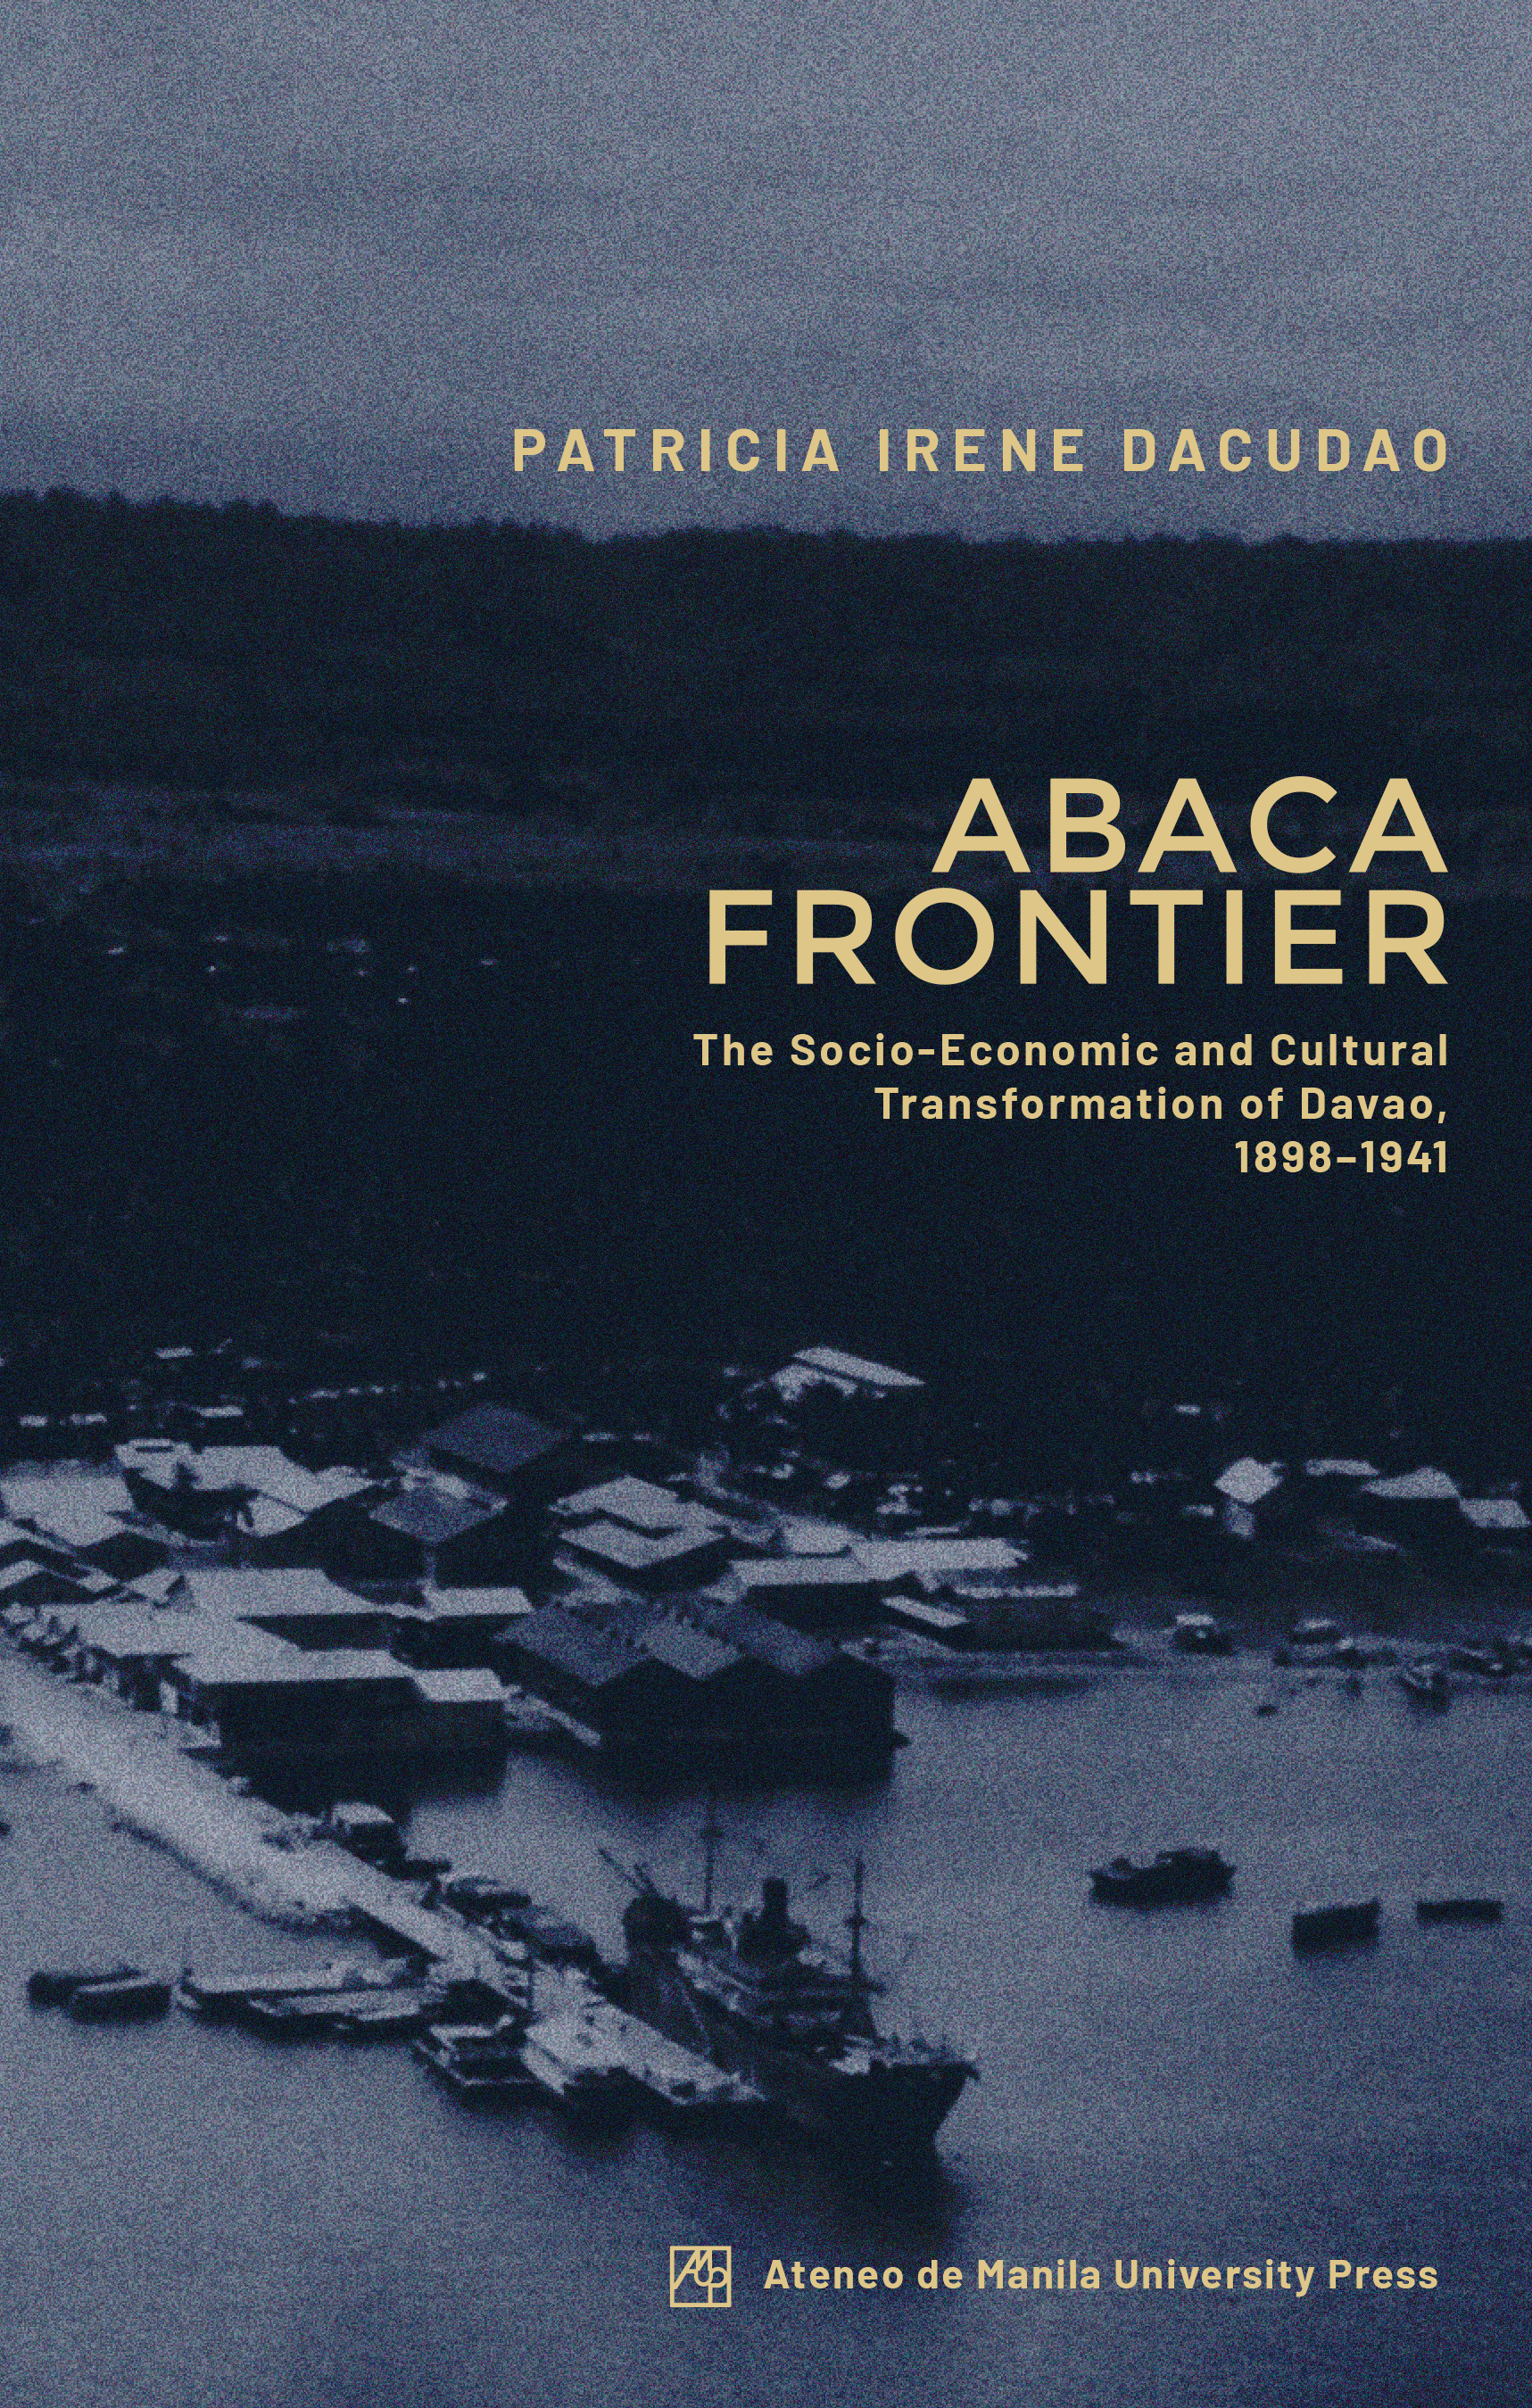 Book cover of Abaca Frontier: The Socioeconomic and Cultural Transformation of Davao, 1898–1941 by historian Patricia Irene Dacudao